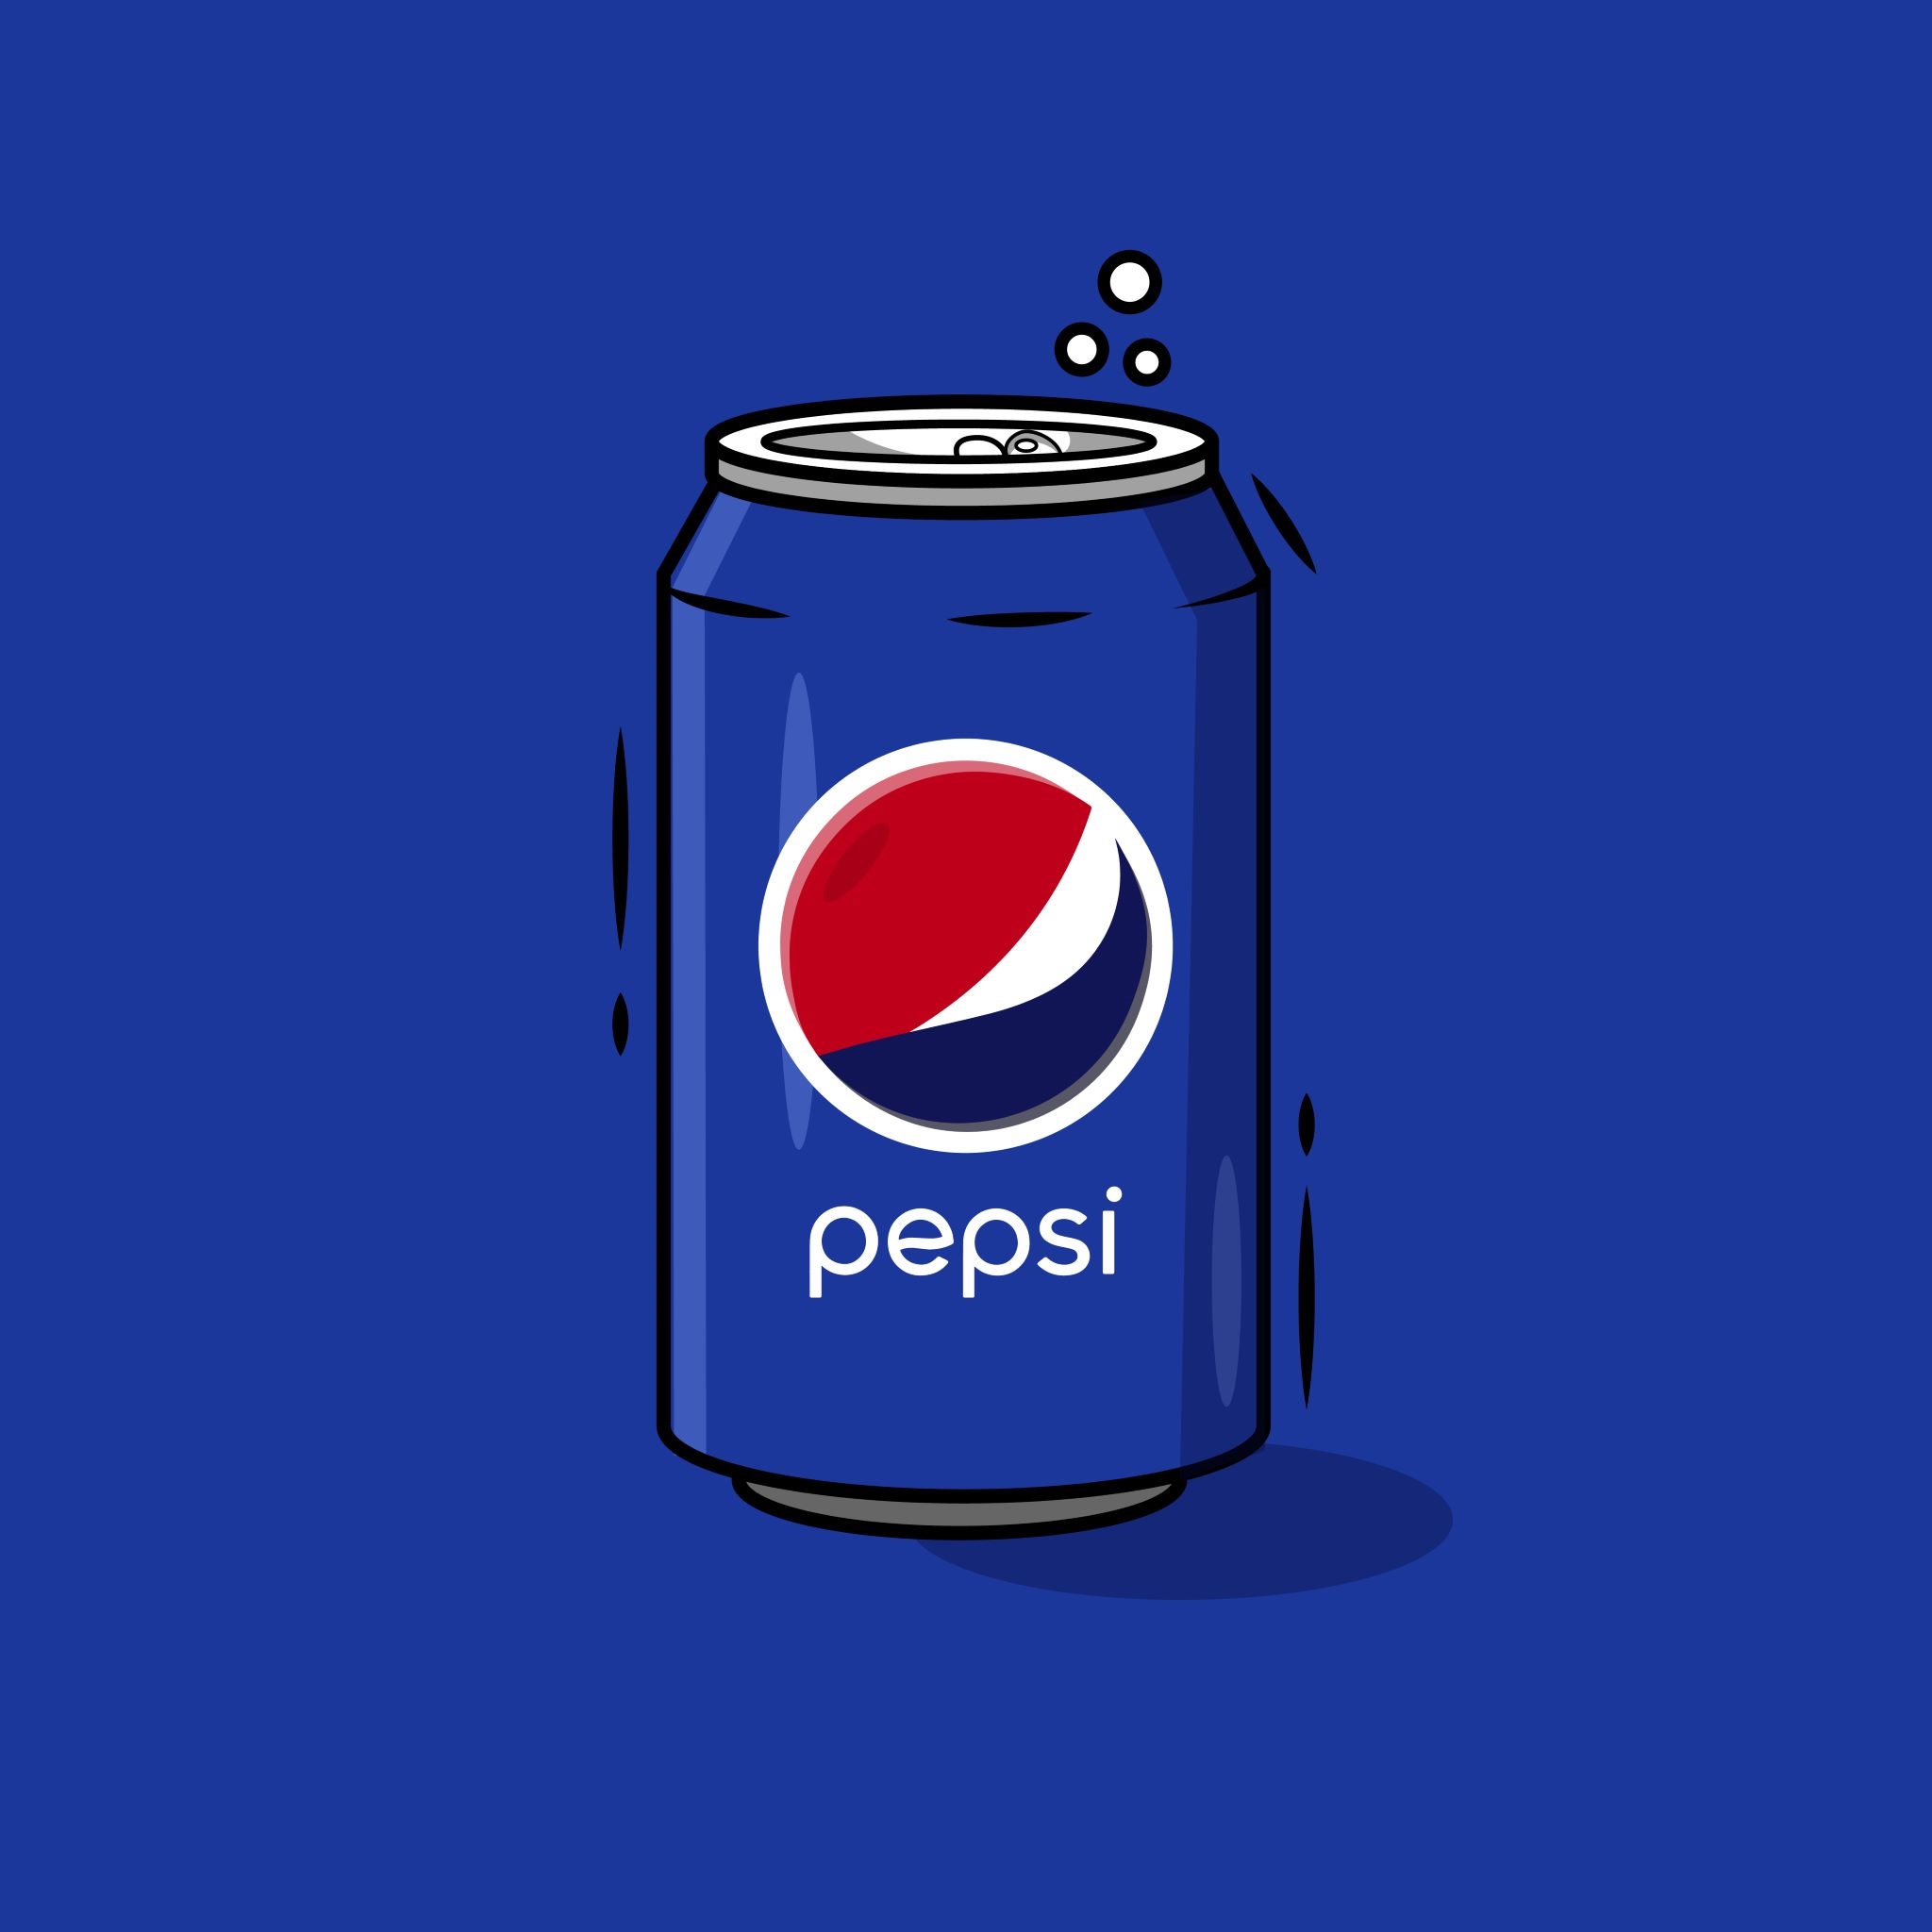 Pepsi Can Vector Art cover image.